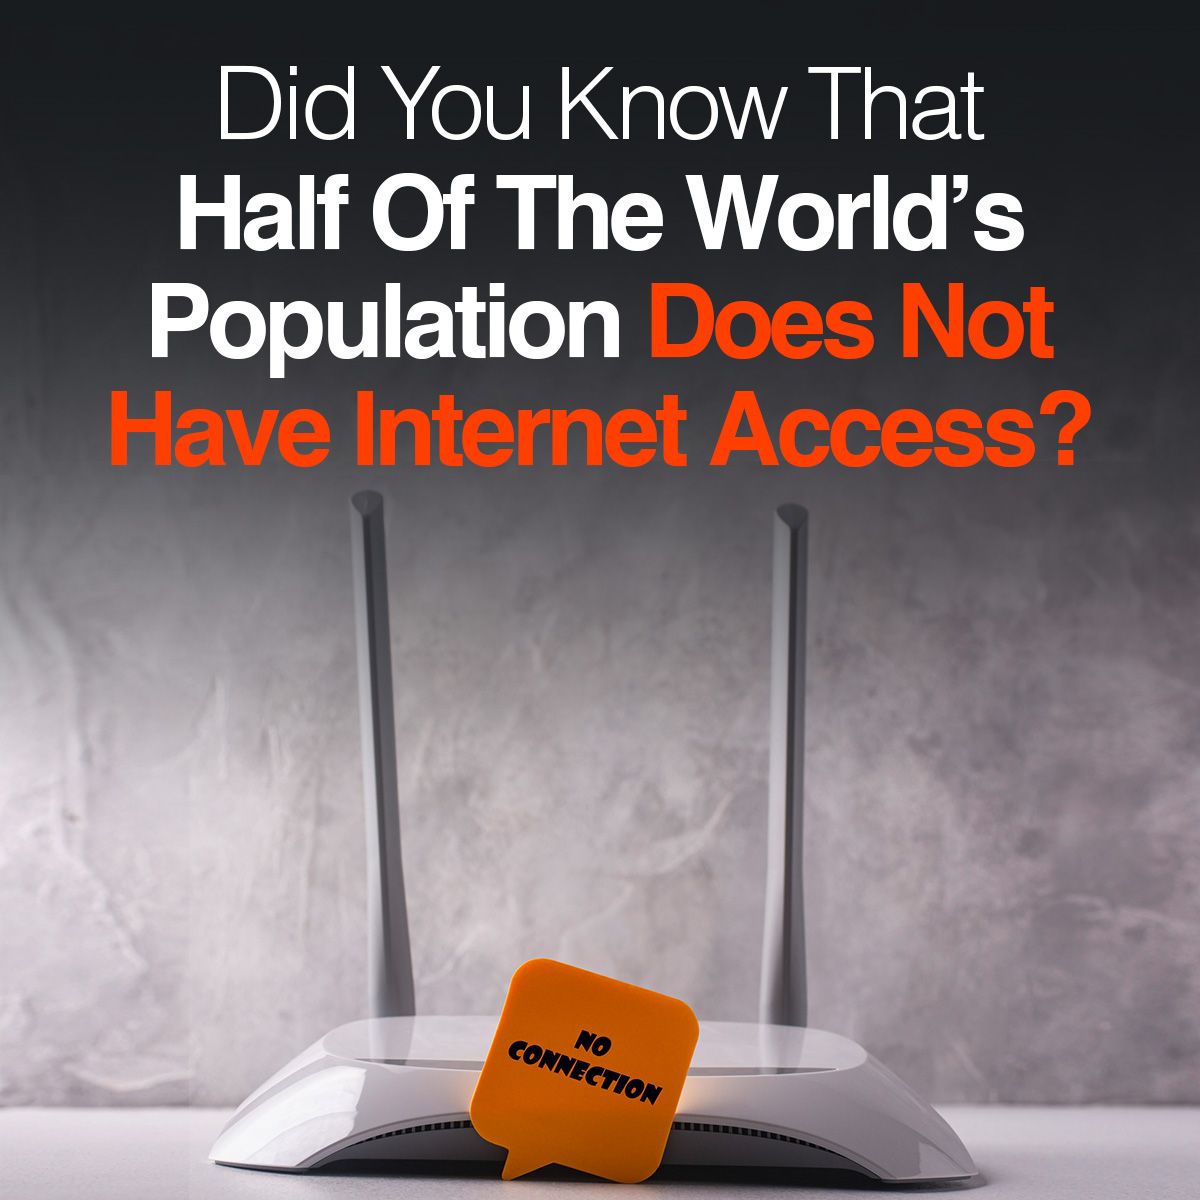 Did You Know That Half Of The World's Population Does Not Have Internet Access?